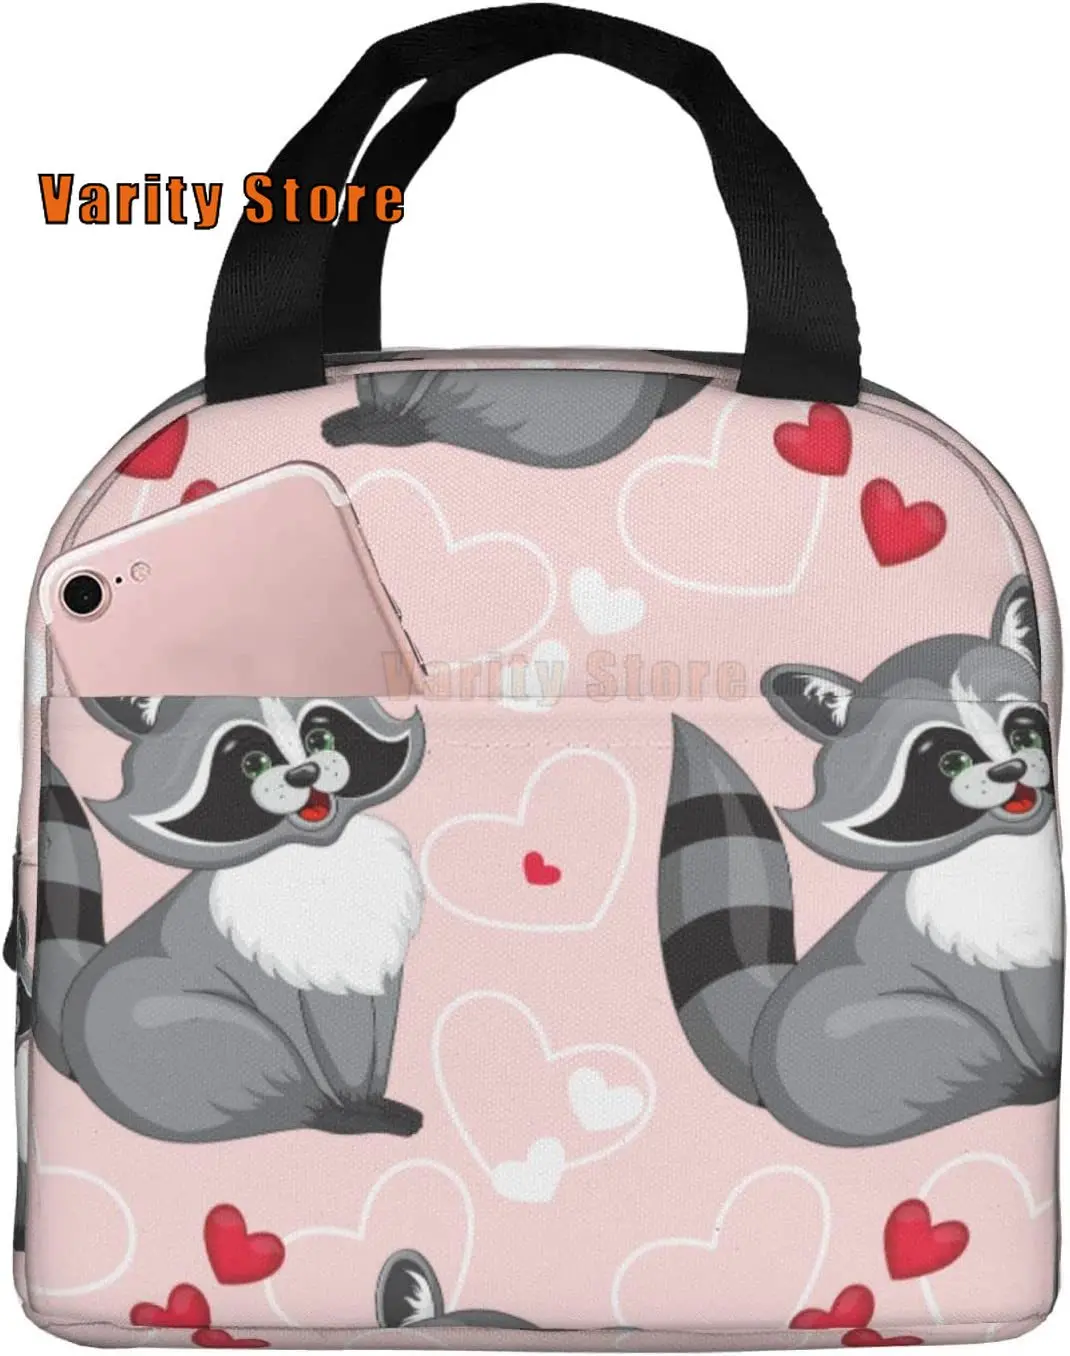 

Funny Raccoon Lunch Bag Portable Reusable Tote Bags Insulated Cooler Lunch Box For Men And Women Office Picnic